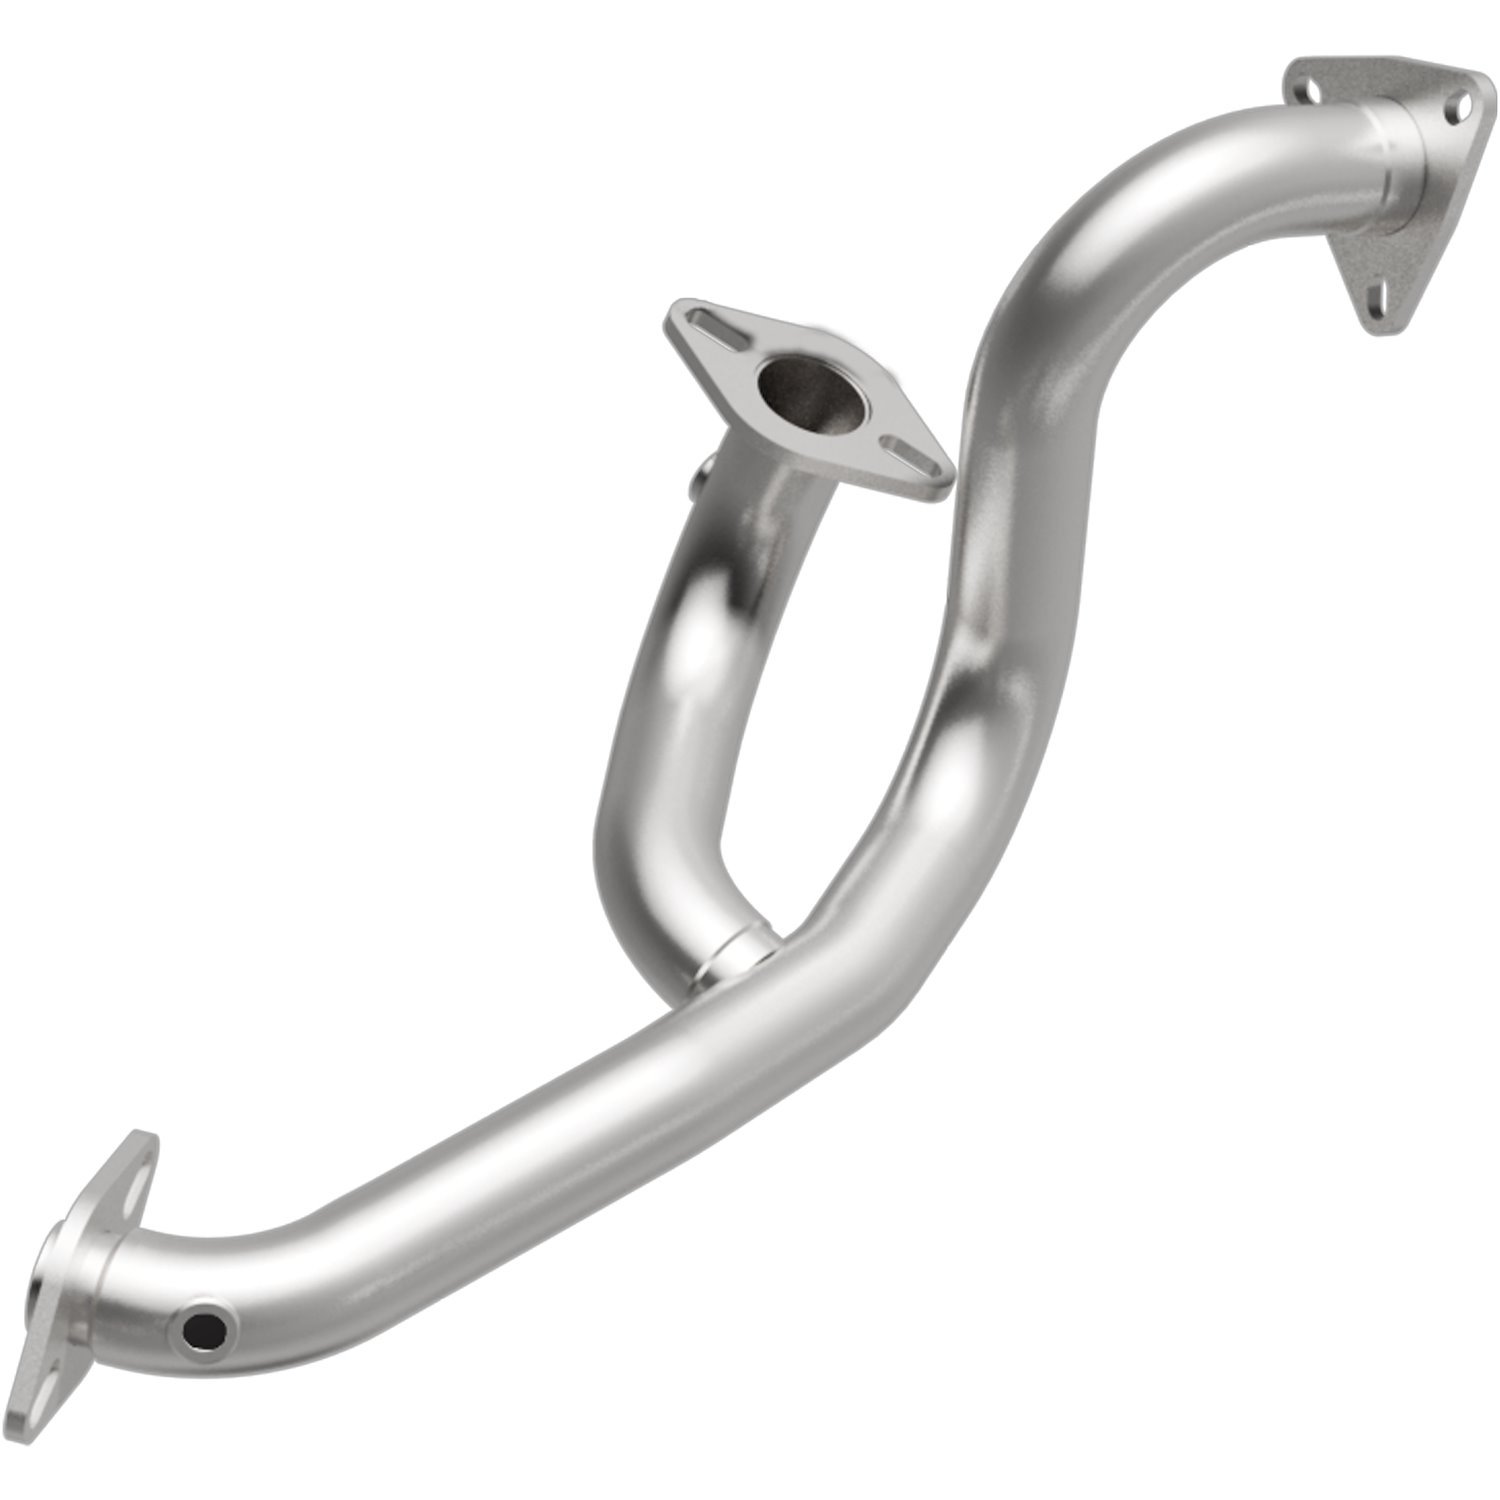 Direct-Fit Exhaust Y-Pipe, 2001-2006 Chrysler Sebring/Stratus 2.7L